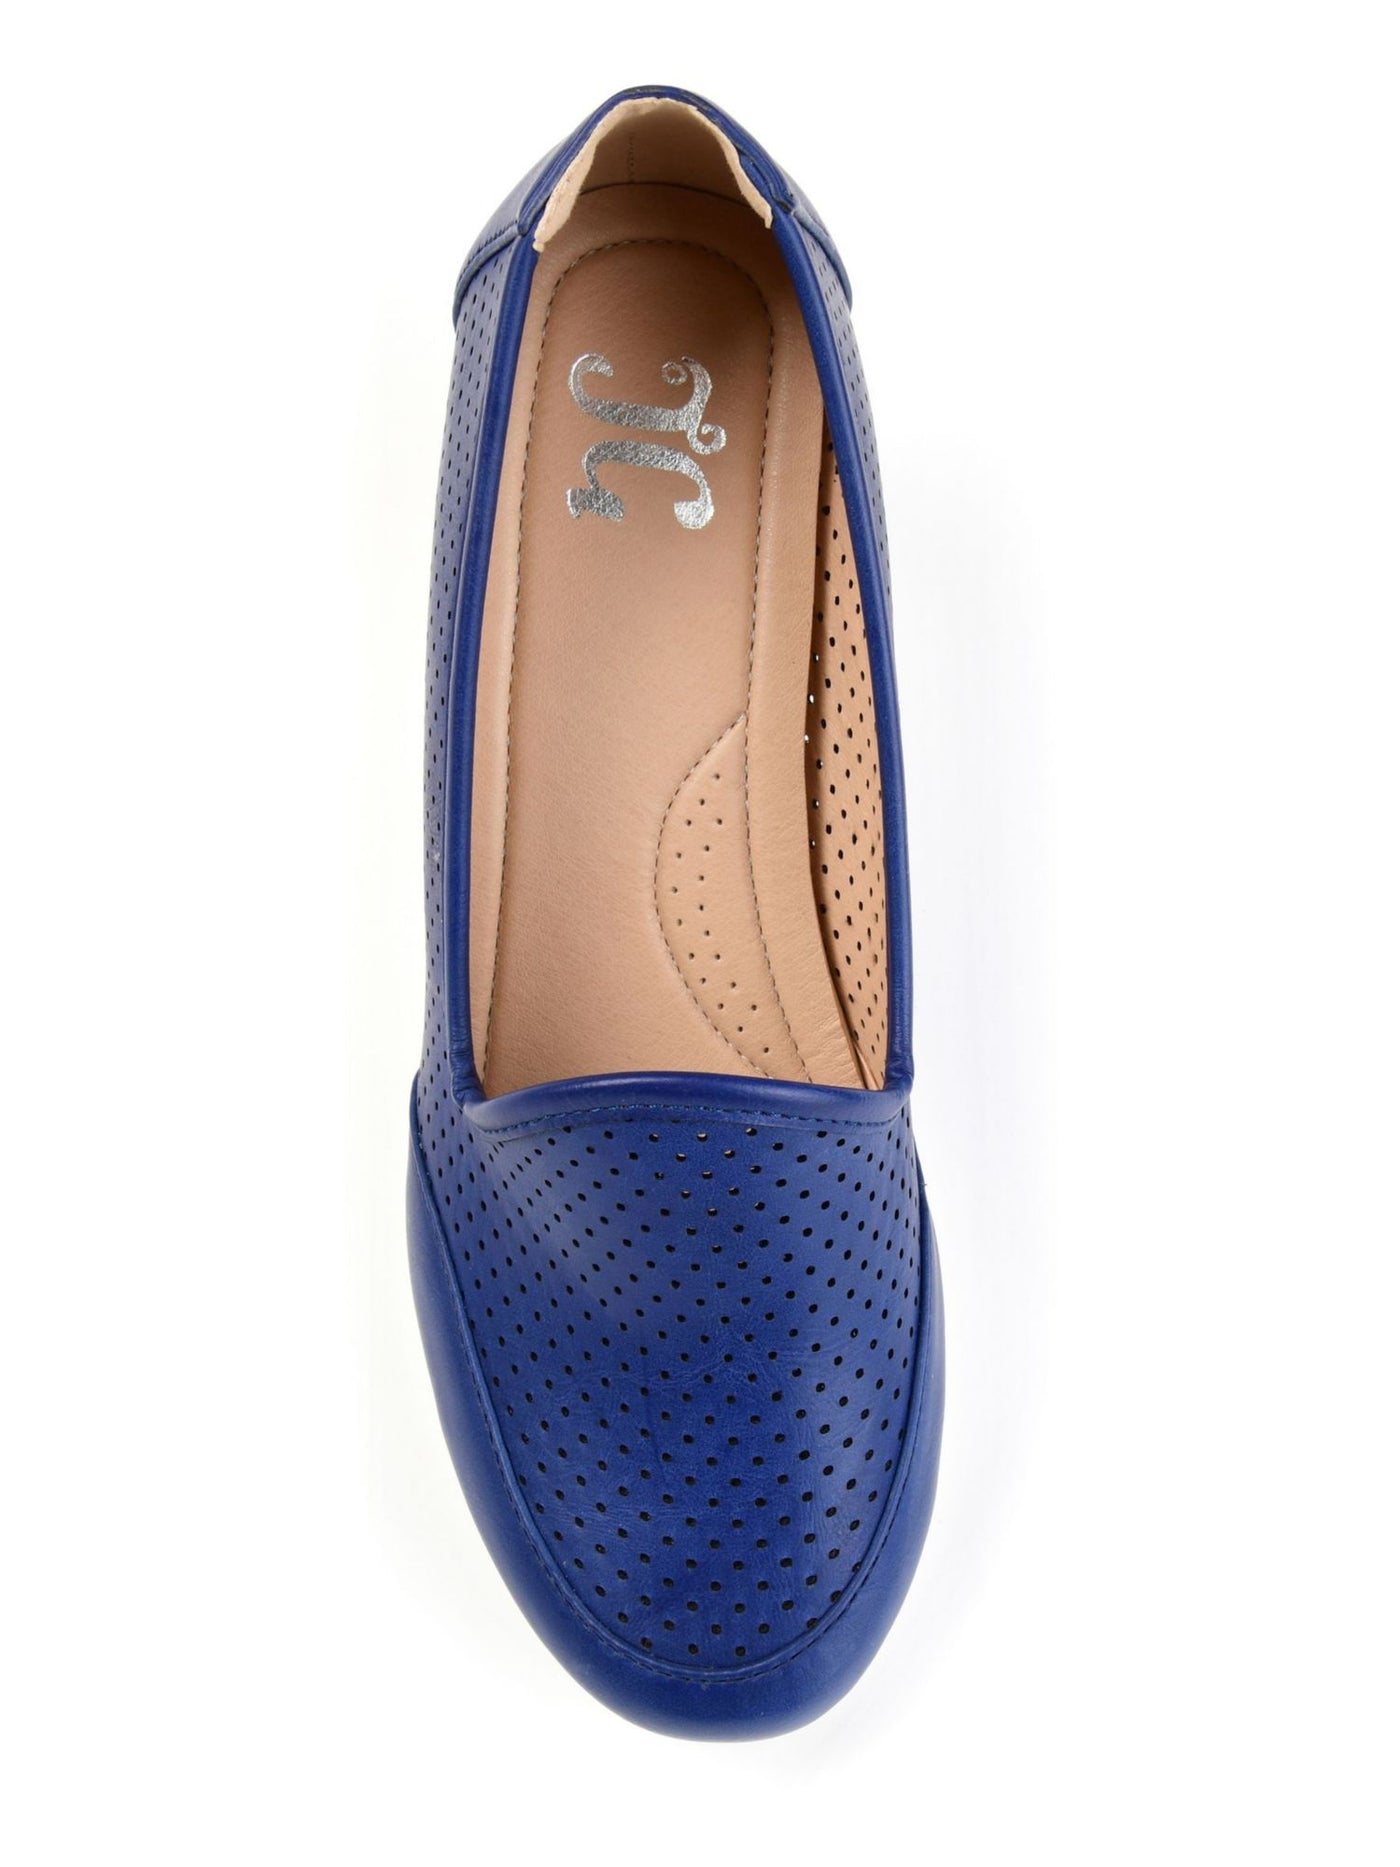 JOURNEE COLLECTION Womens Blue Perforated Cushioned Round Toe Wedge Slip On Heels Shoes 9.5